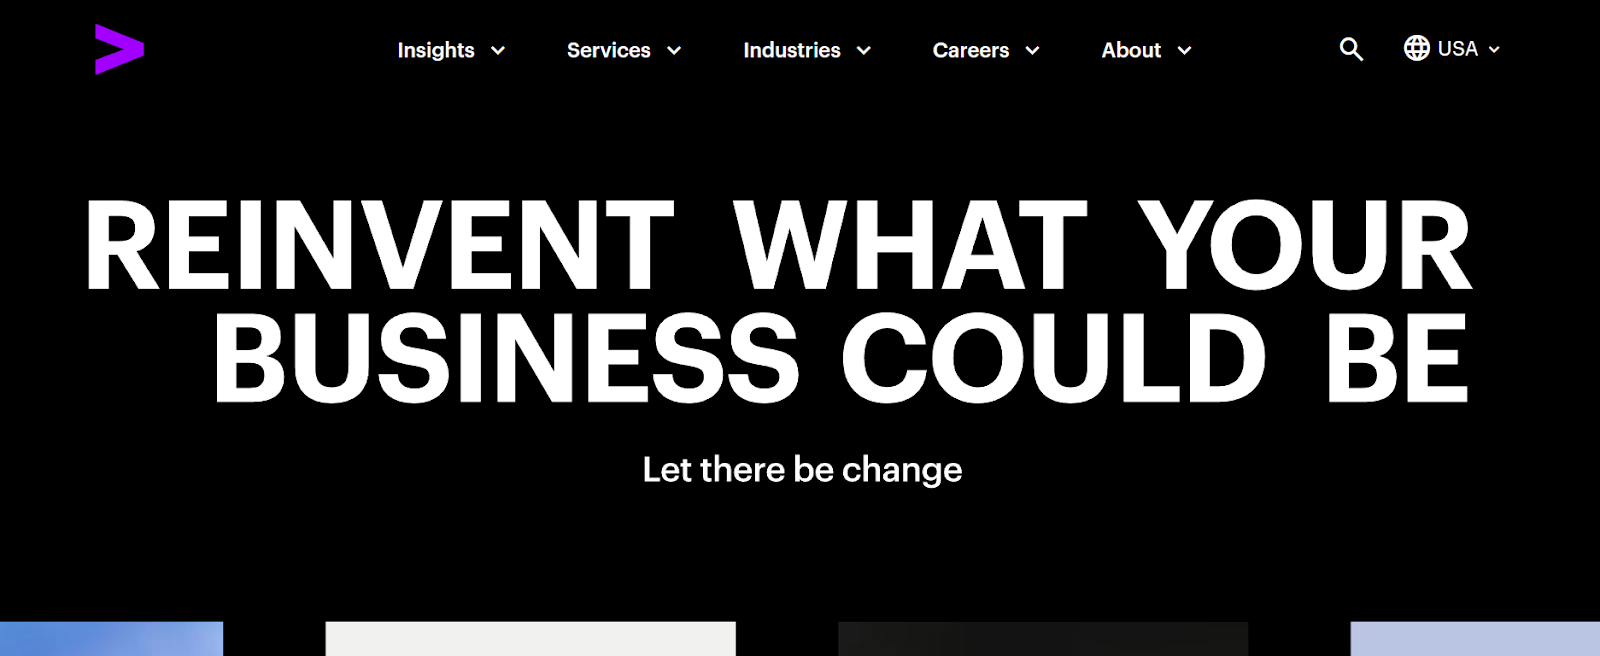 Accenture homepage. 